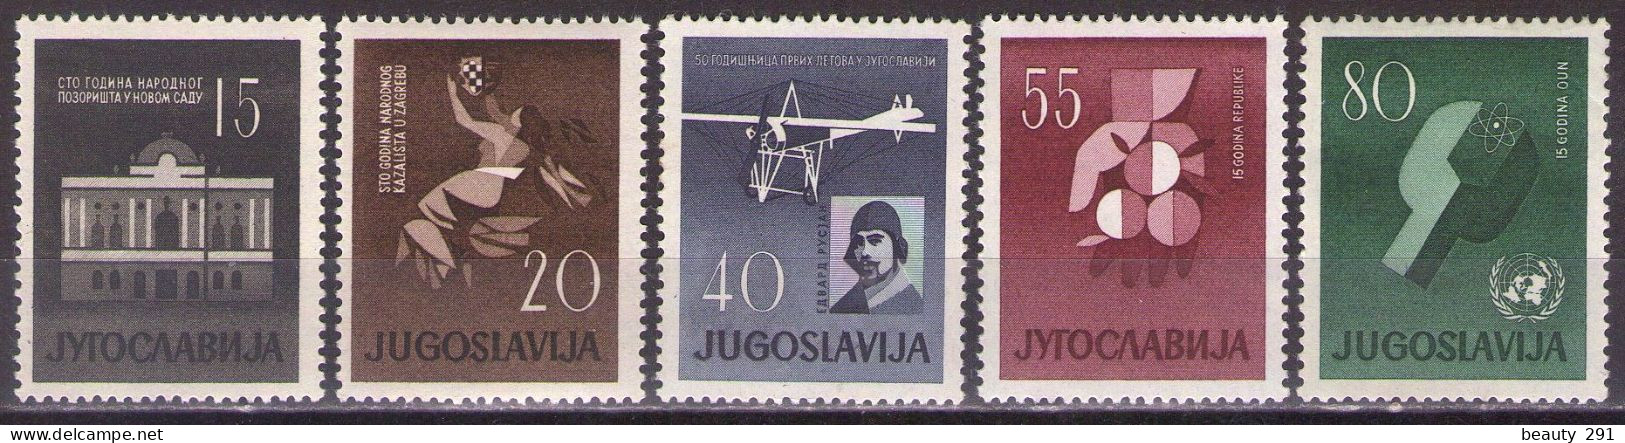 Yugoslavia 1960 - Significant Jubilees - Mi 930-934 - MNH**VF - Unused Stamps